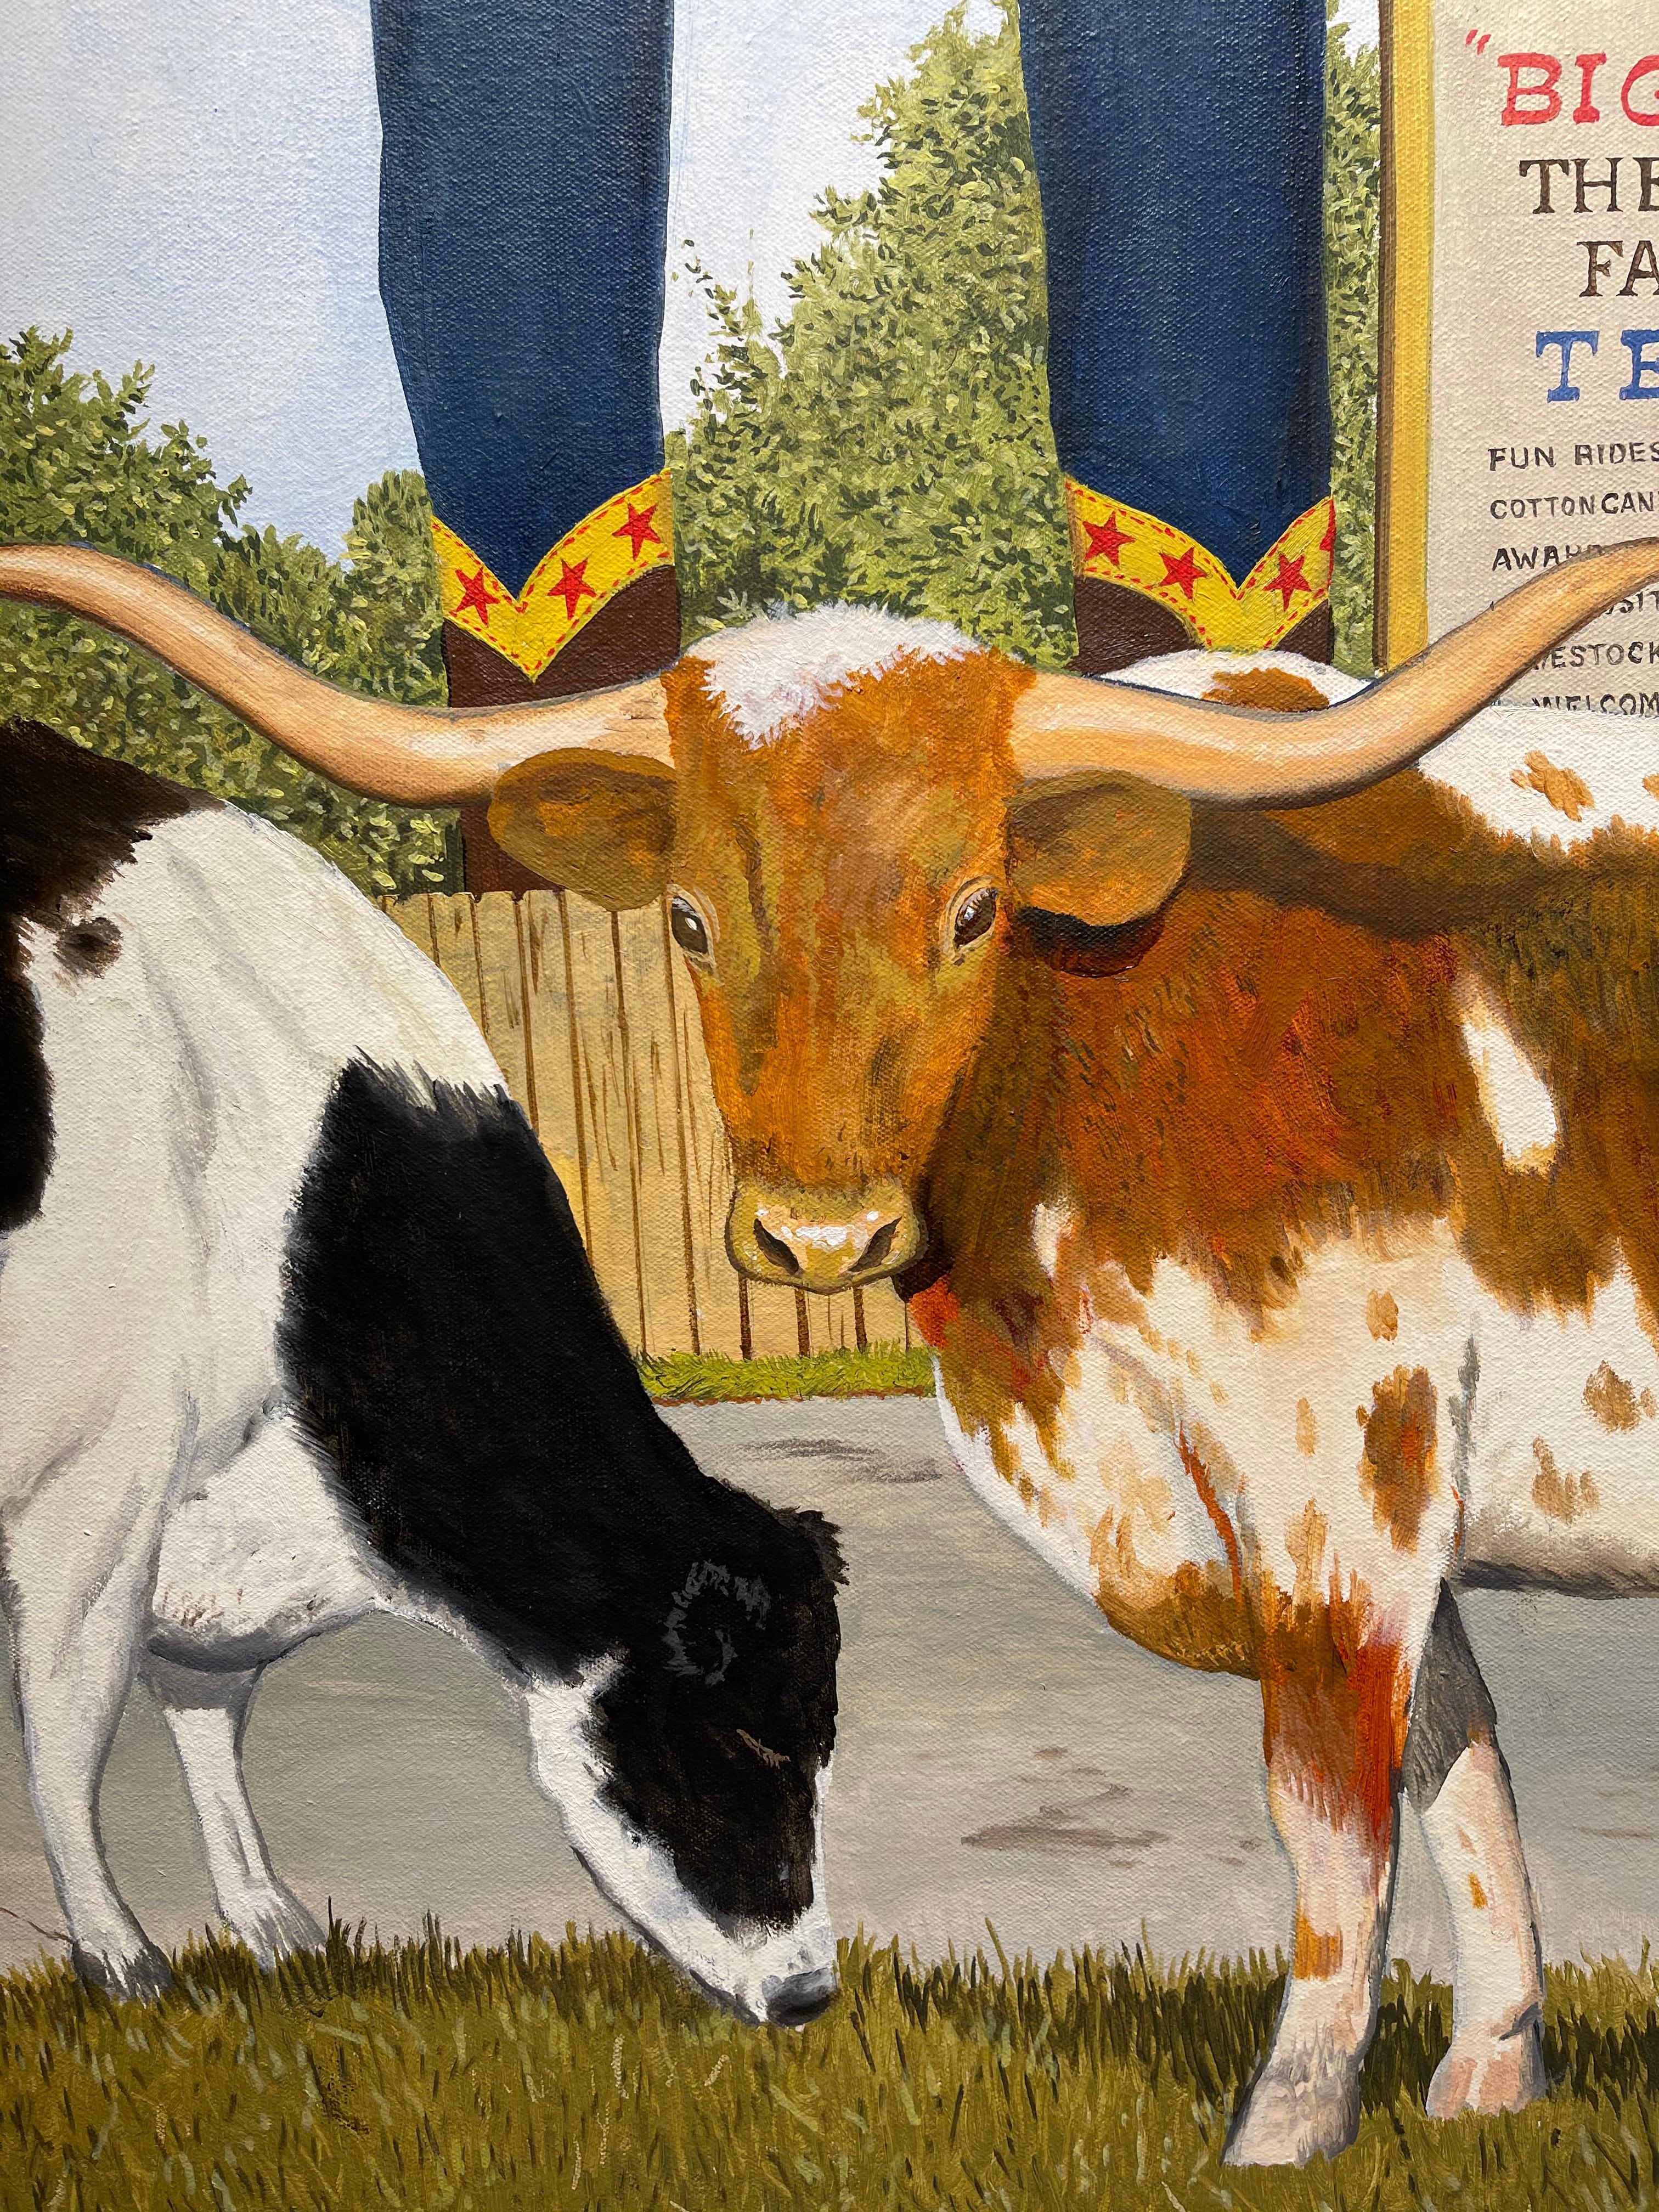 Contemporary American Oil Painting with Big Tex, Cowboy, and Texas State Fair - Gray Still-Life Painting by Daniel Blagg